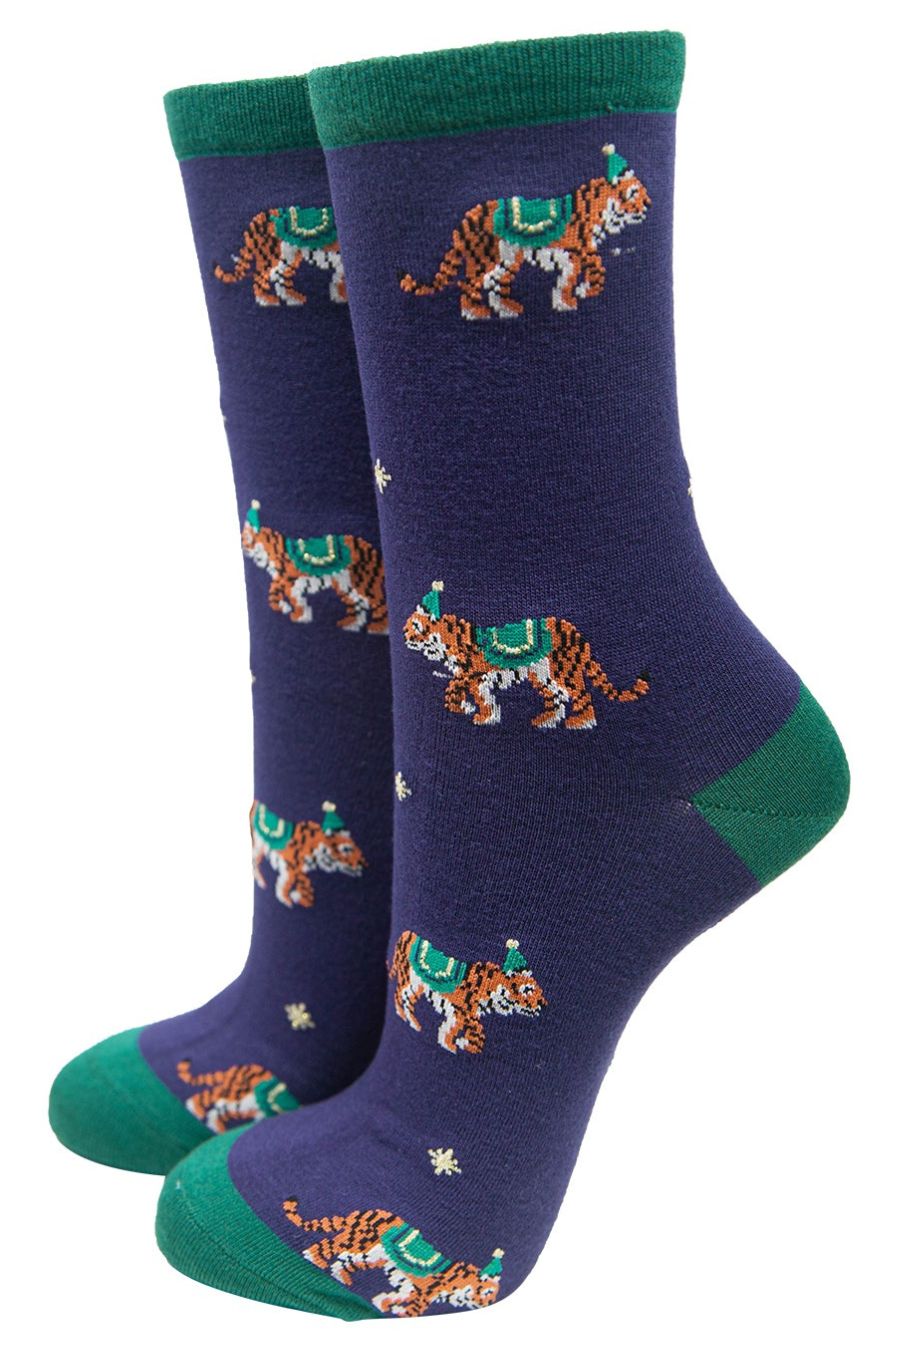 navy blue ankle socks with tigers wearing party hats